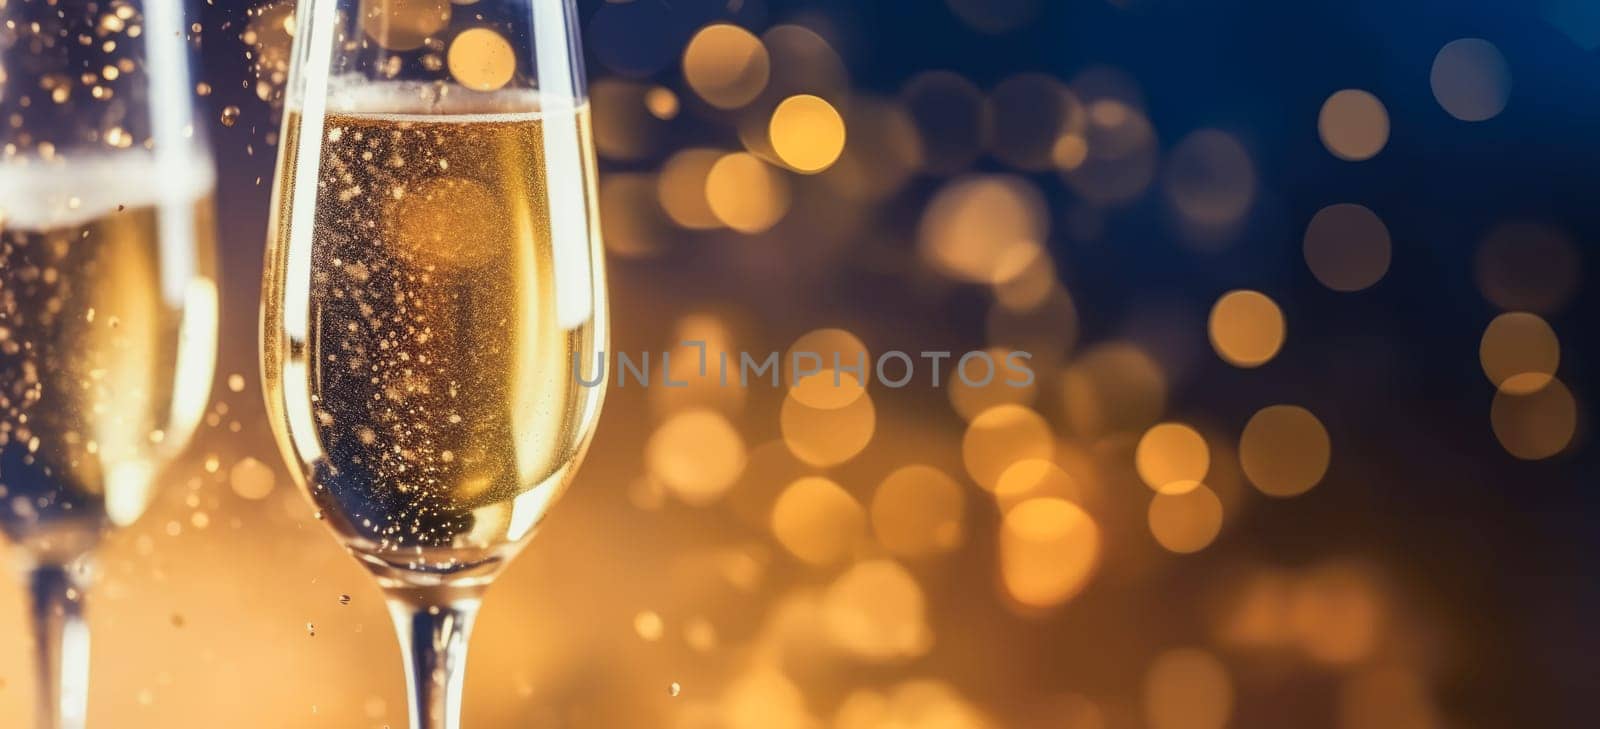 Happy New Year and champagne background comeliness